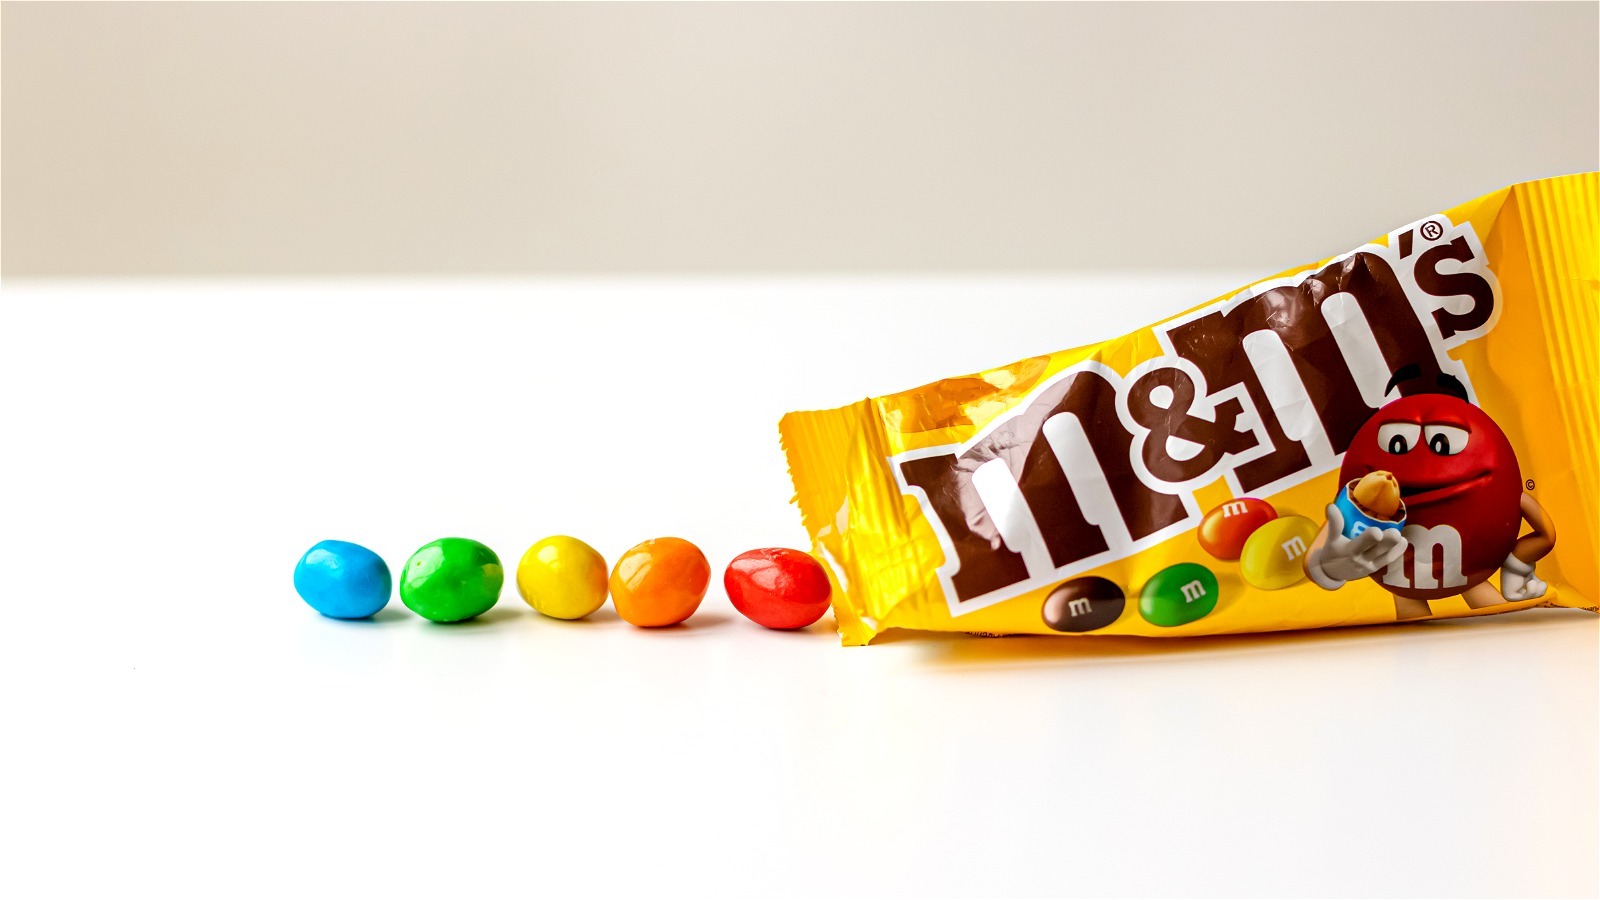 M&m characters, Peanut candy, I love chocolate